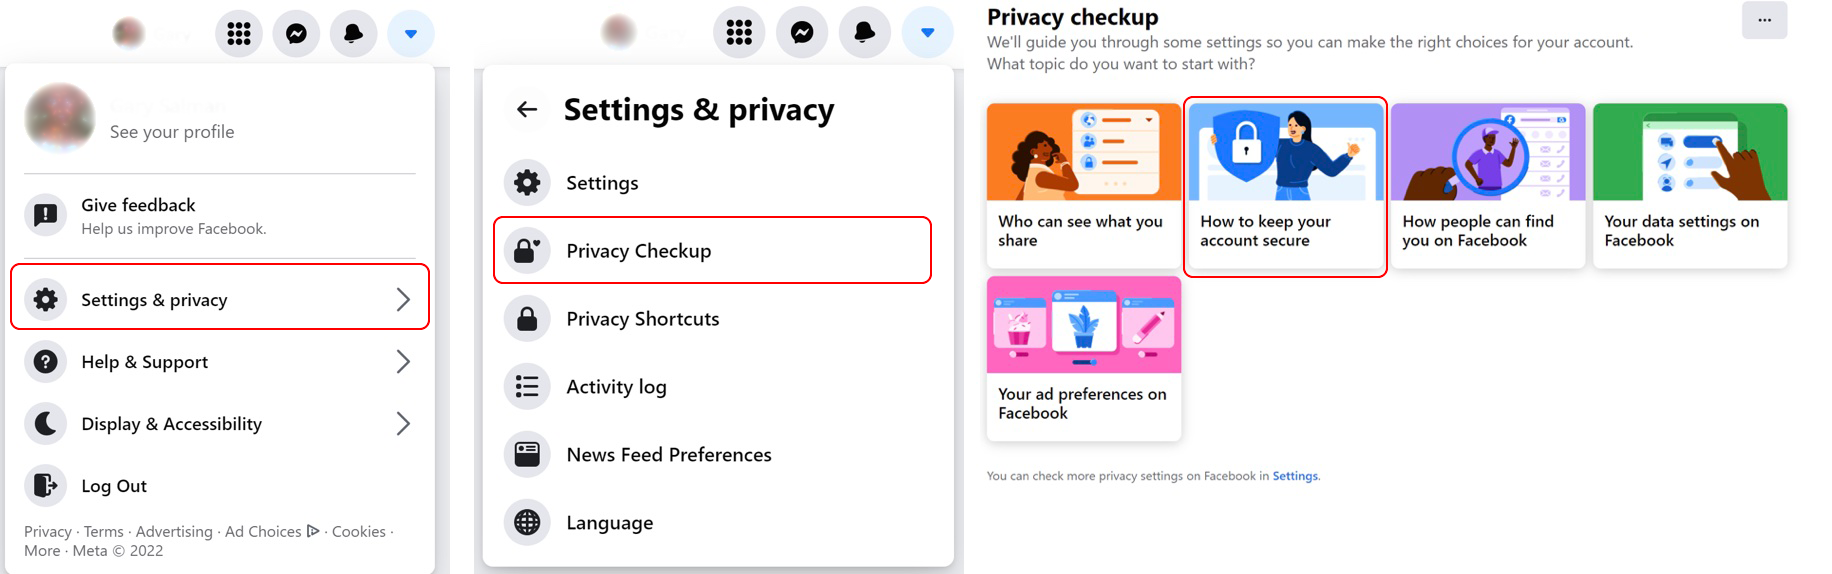 How to set privacy settings on Facebook